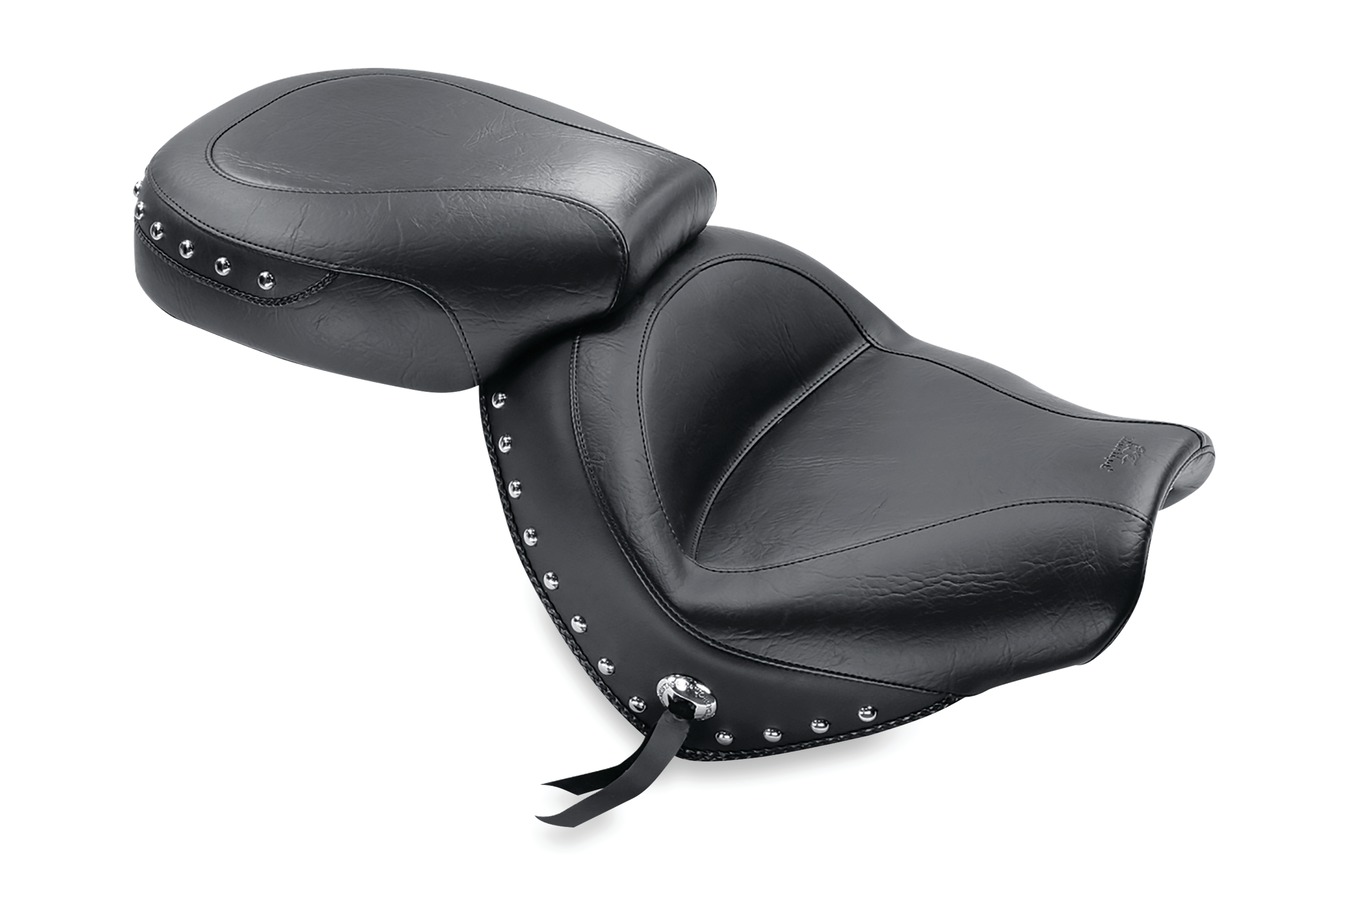 Wide Touring Two-Piece Seat for Honda VTX1300C 2004-